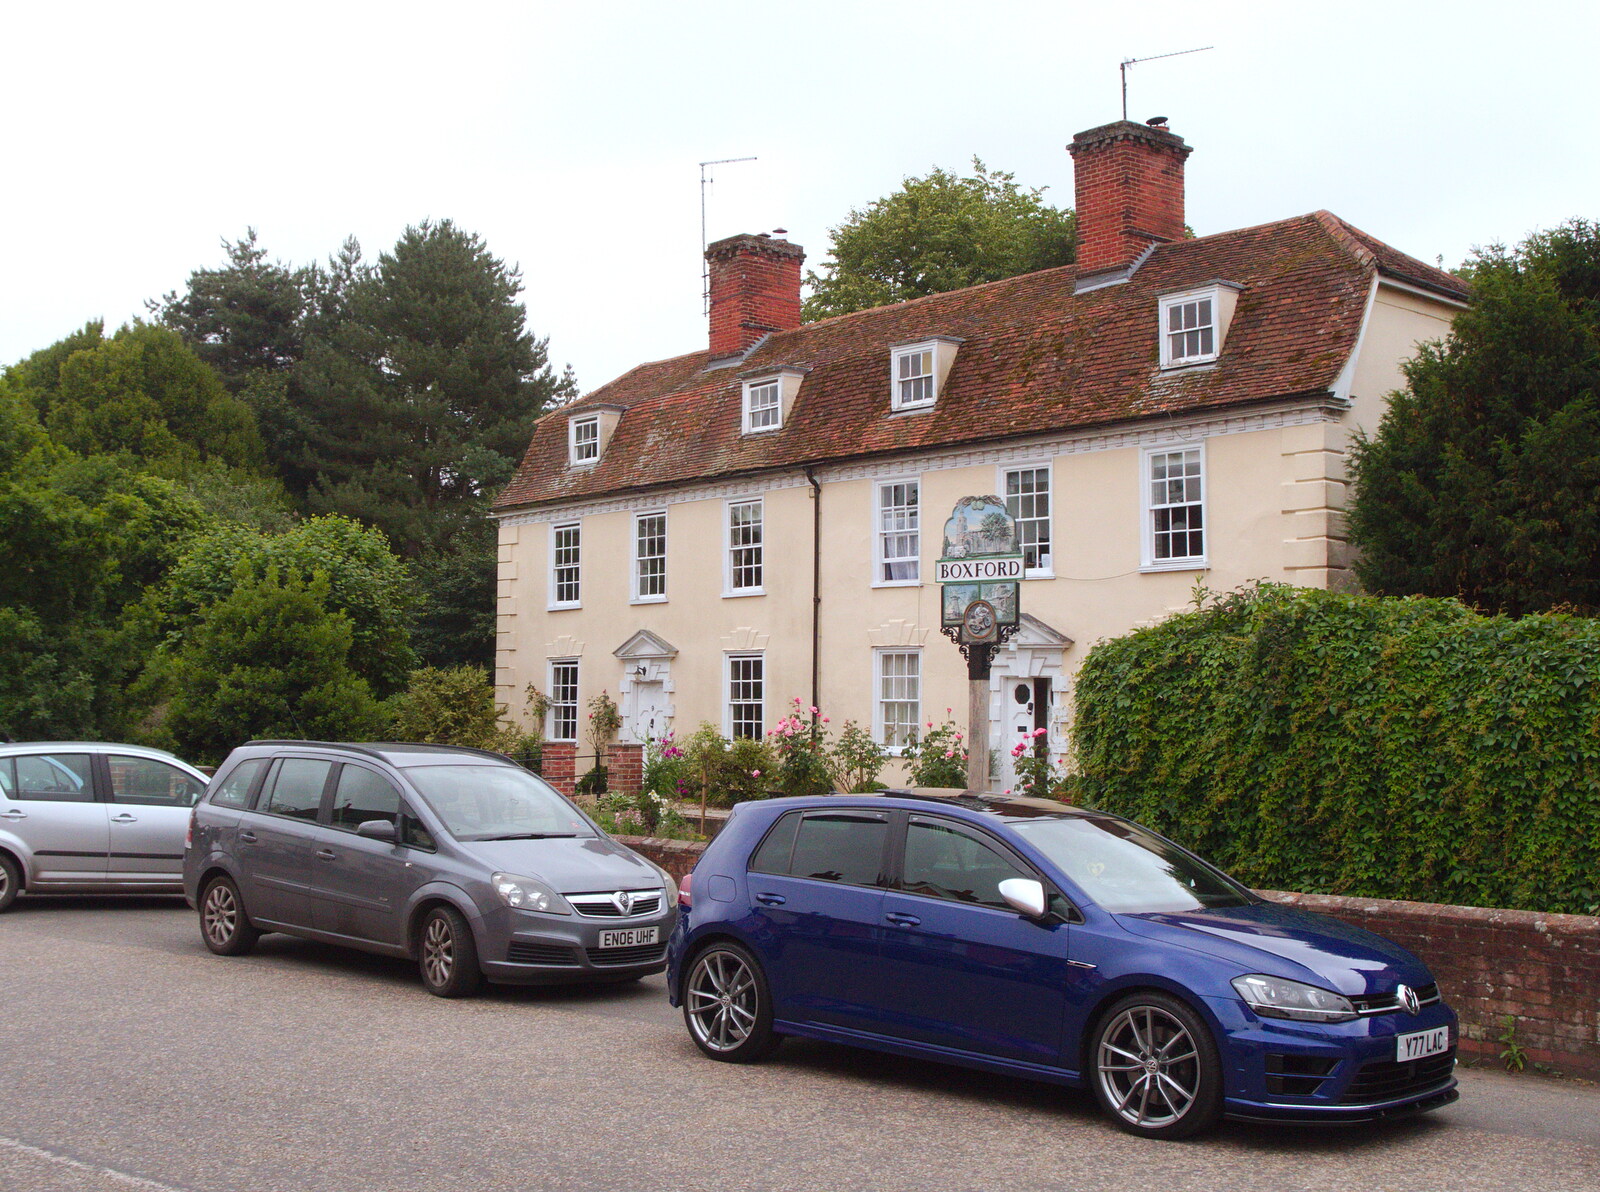 A Postcard from Boxford and BSCC at Pulham, Suffolk and Norfolk - 13th July 2019: Another grand house and the Boxford sign